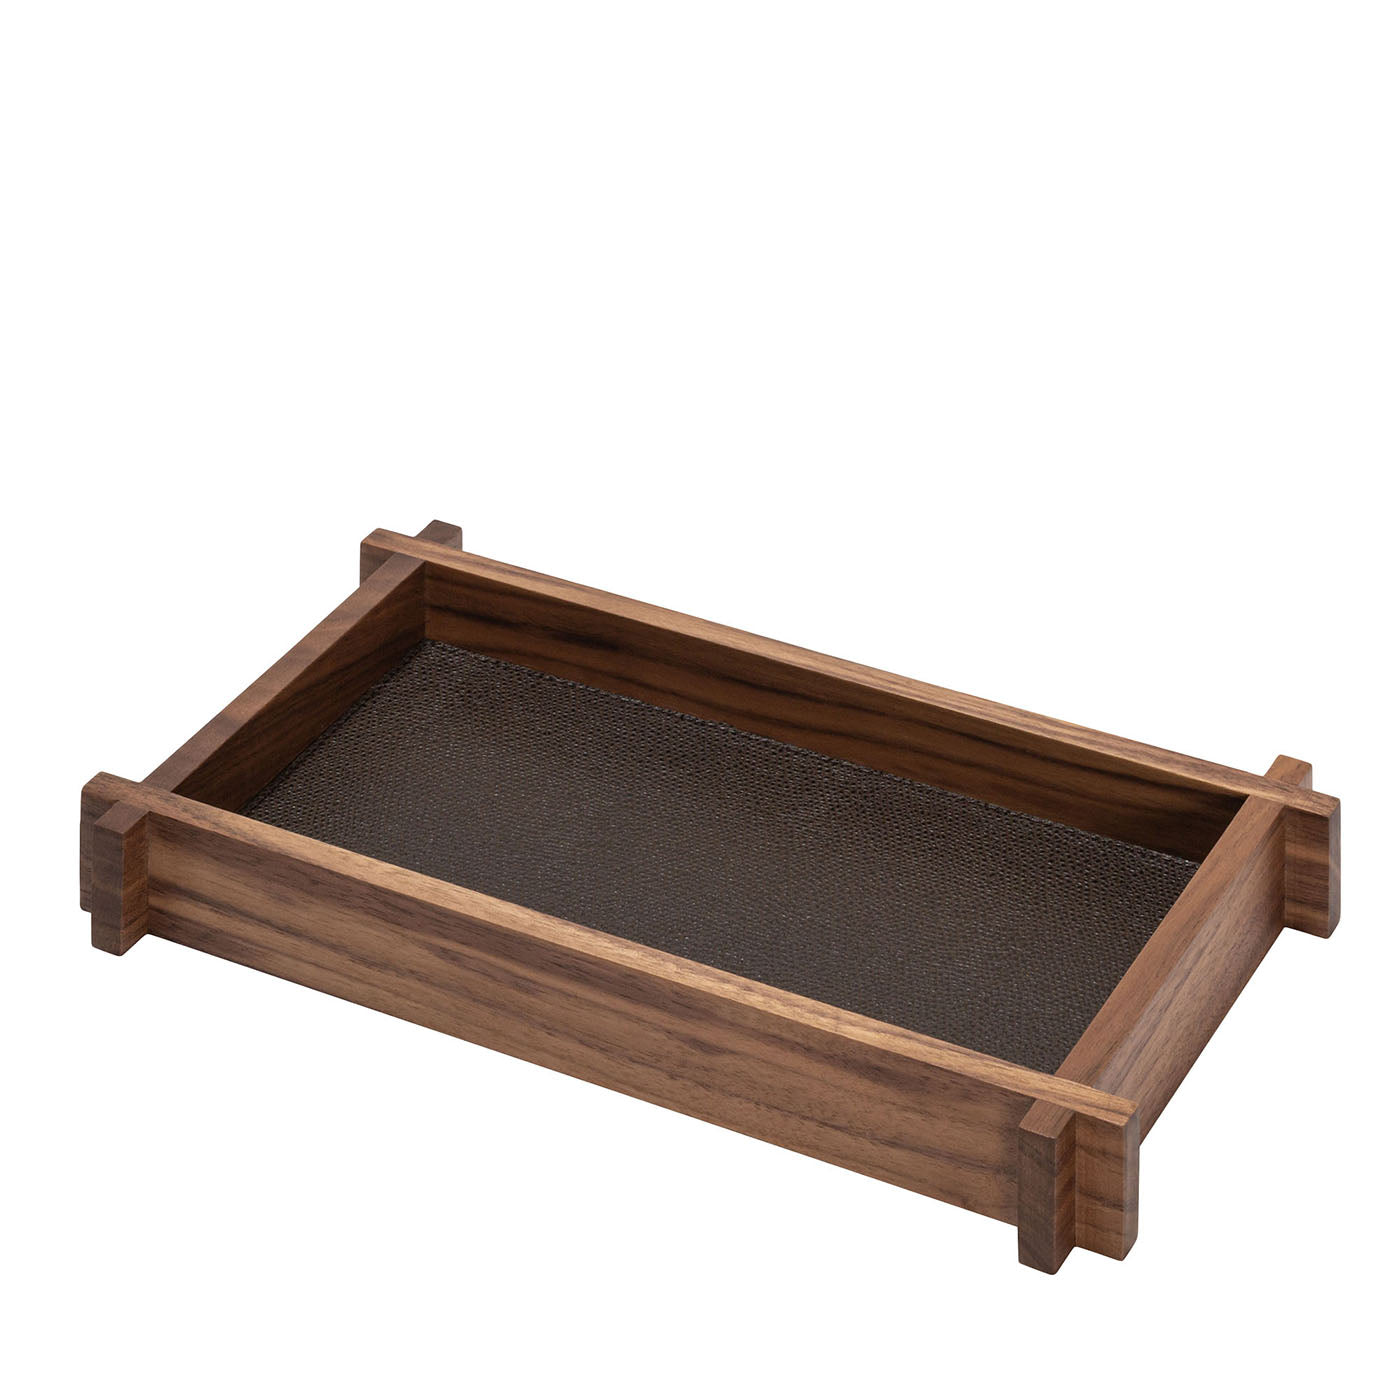 Structura Leather & Wood Dark Brown Small Rectangular Valet Tray - Main view